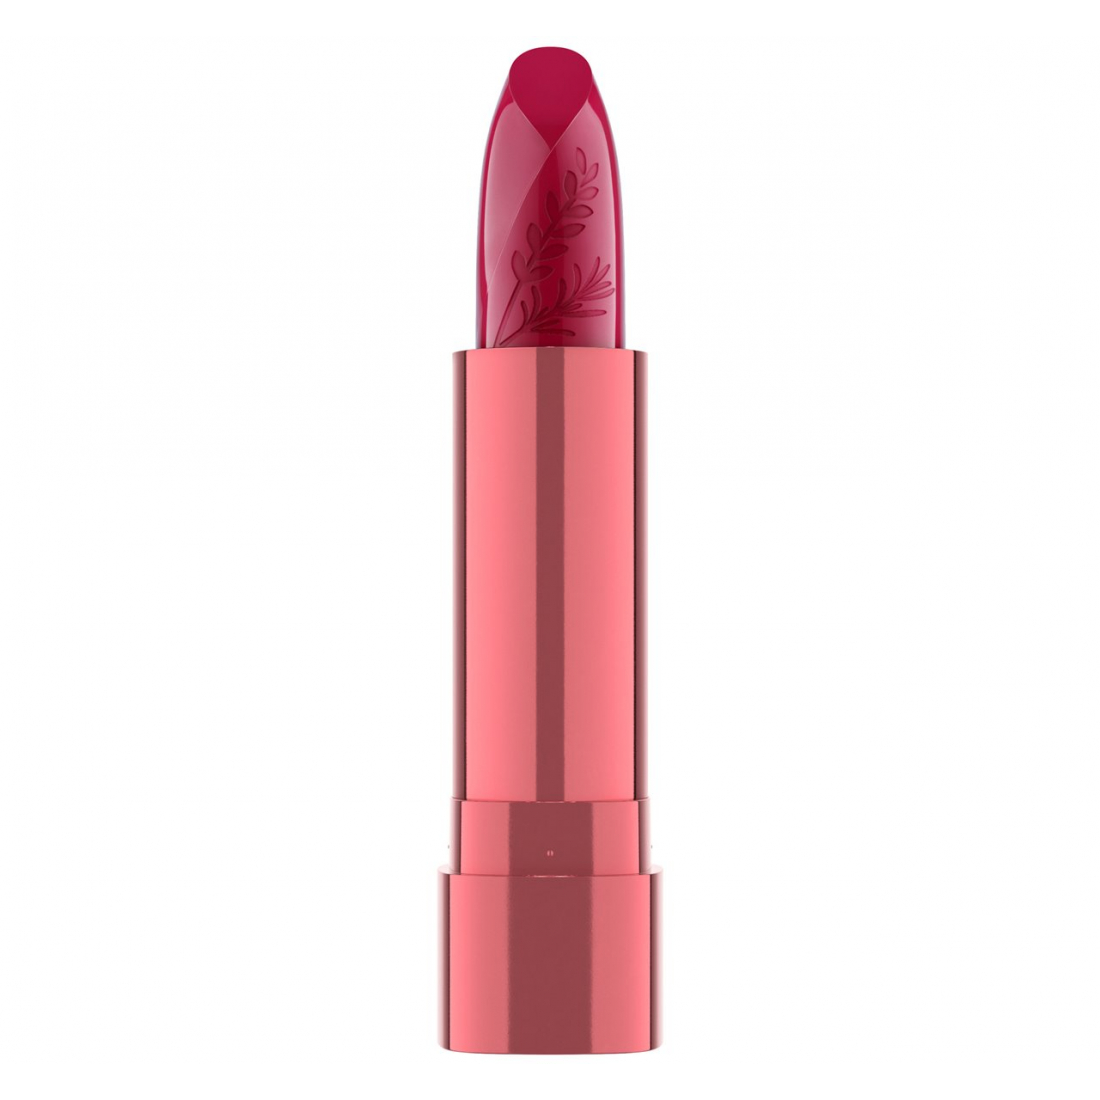 'Flower & Herb Edition' Lipstick - 030 Blooming Orchid 3.3 g